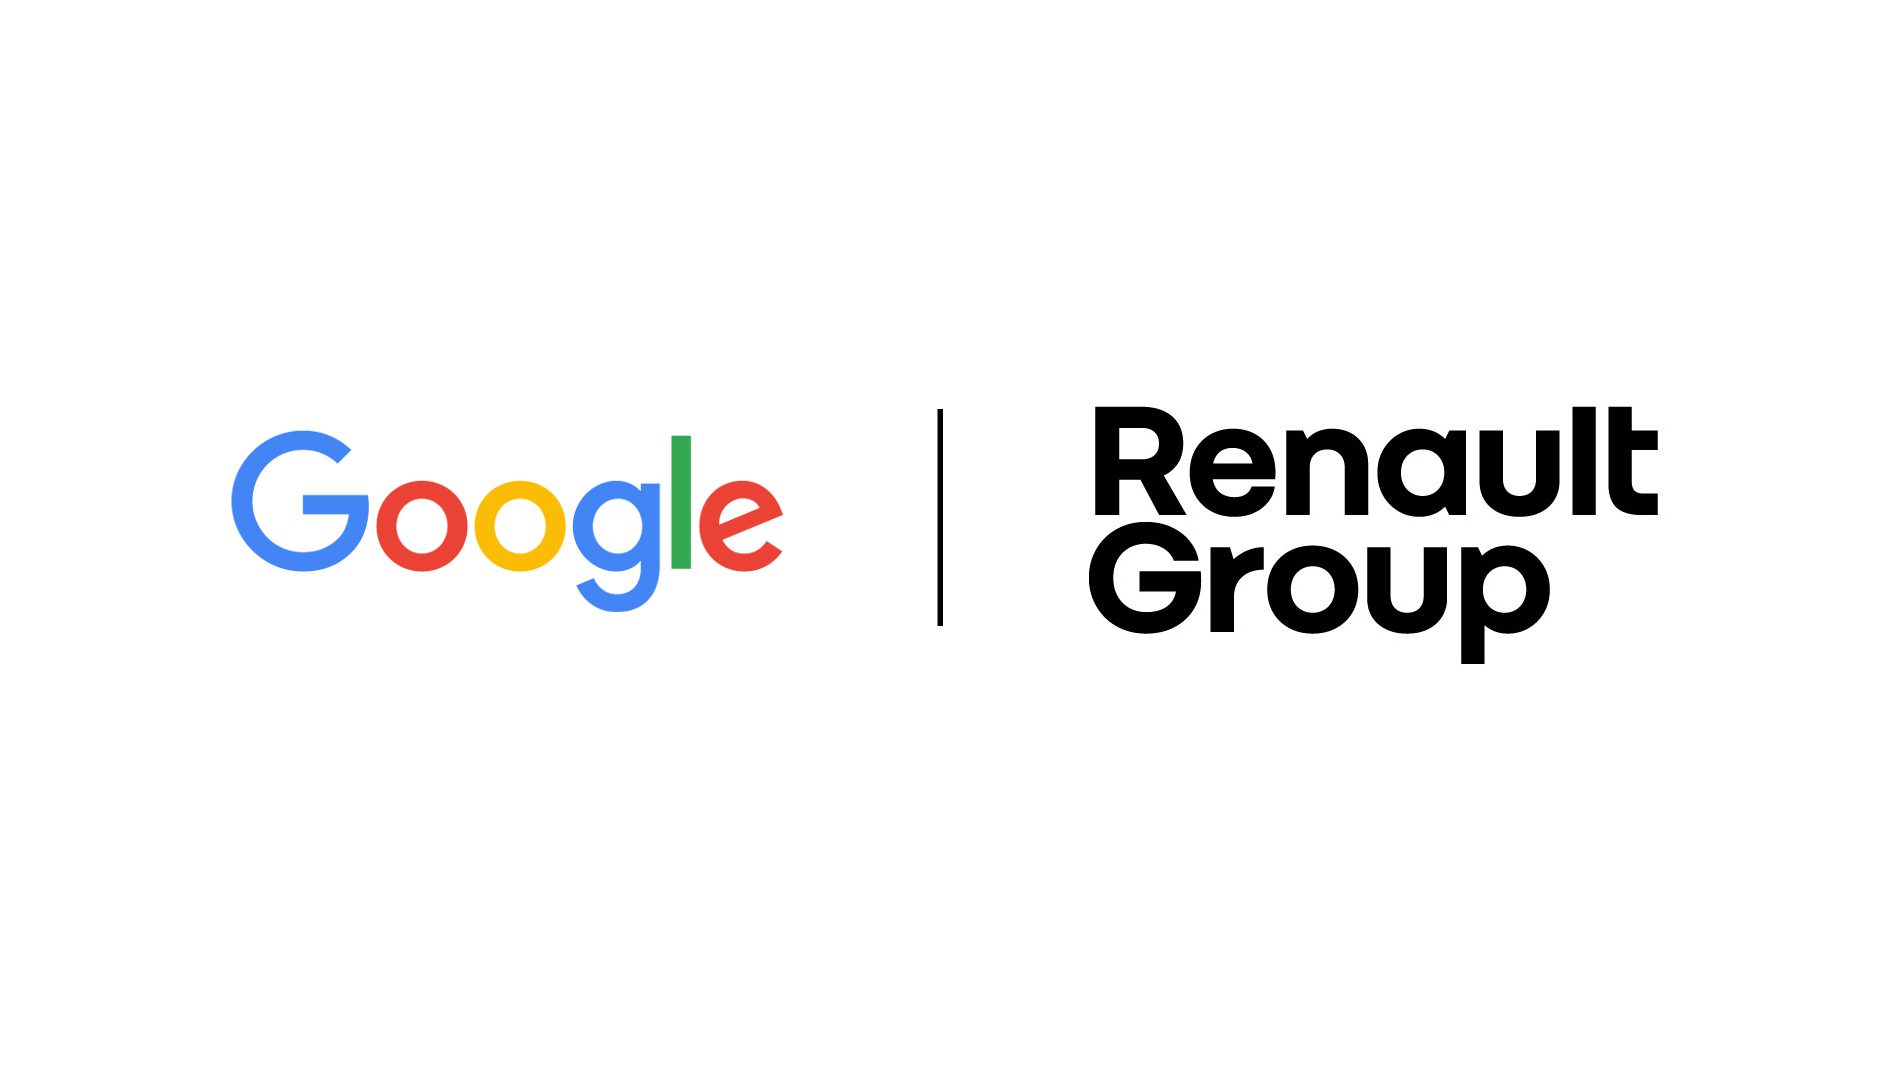 Google and Renault Group's respective logos together.